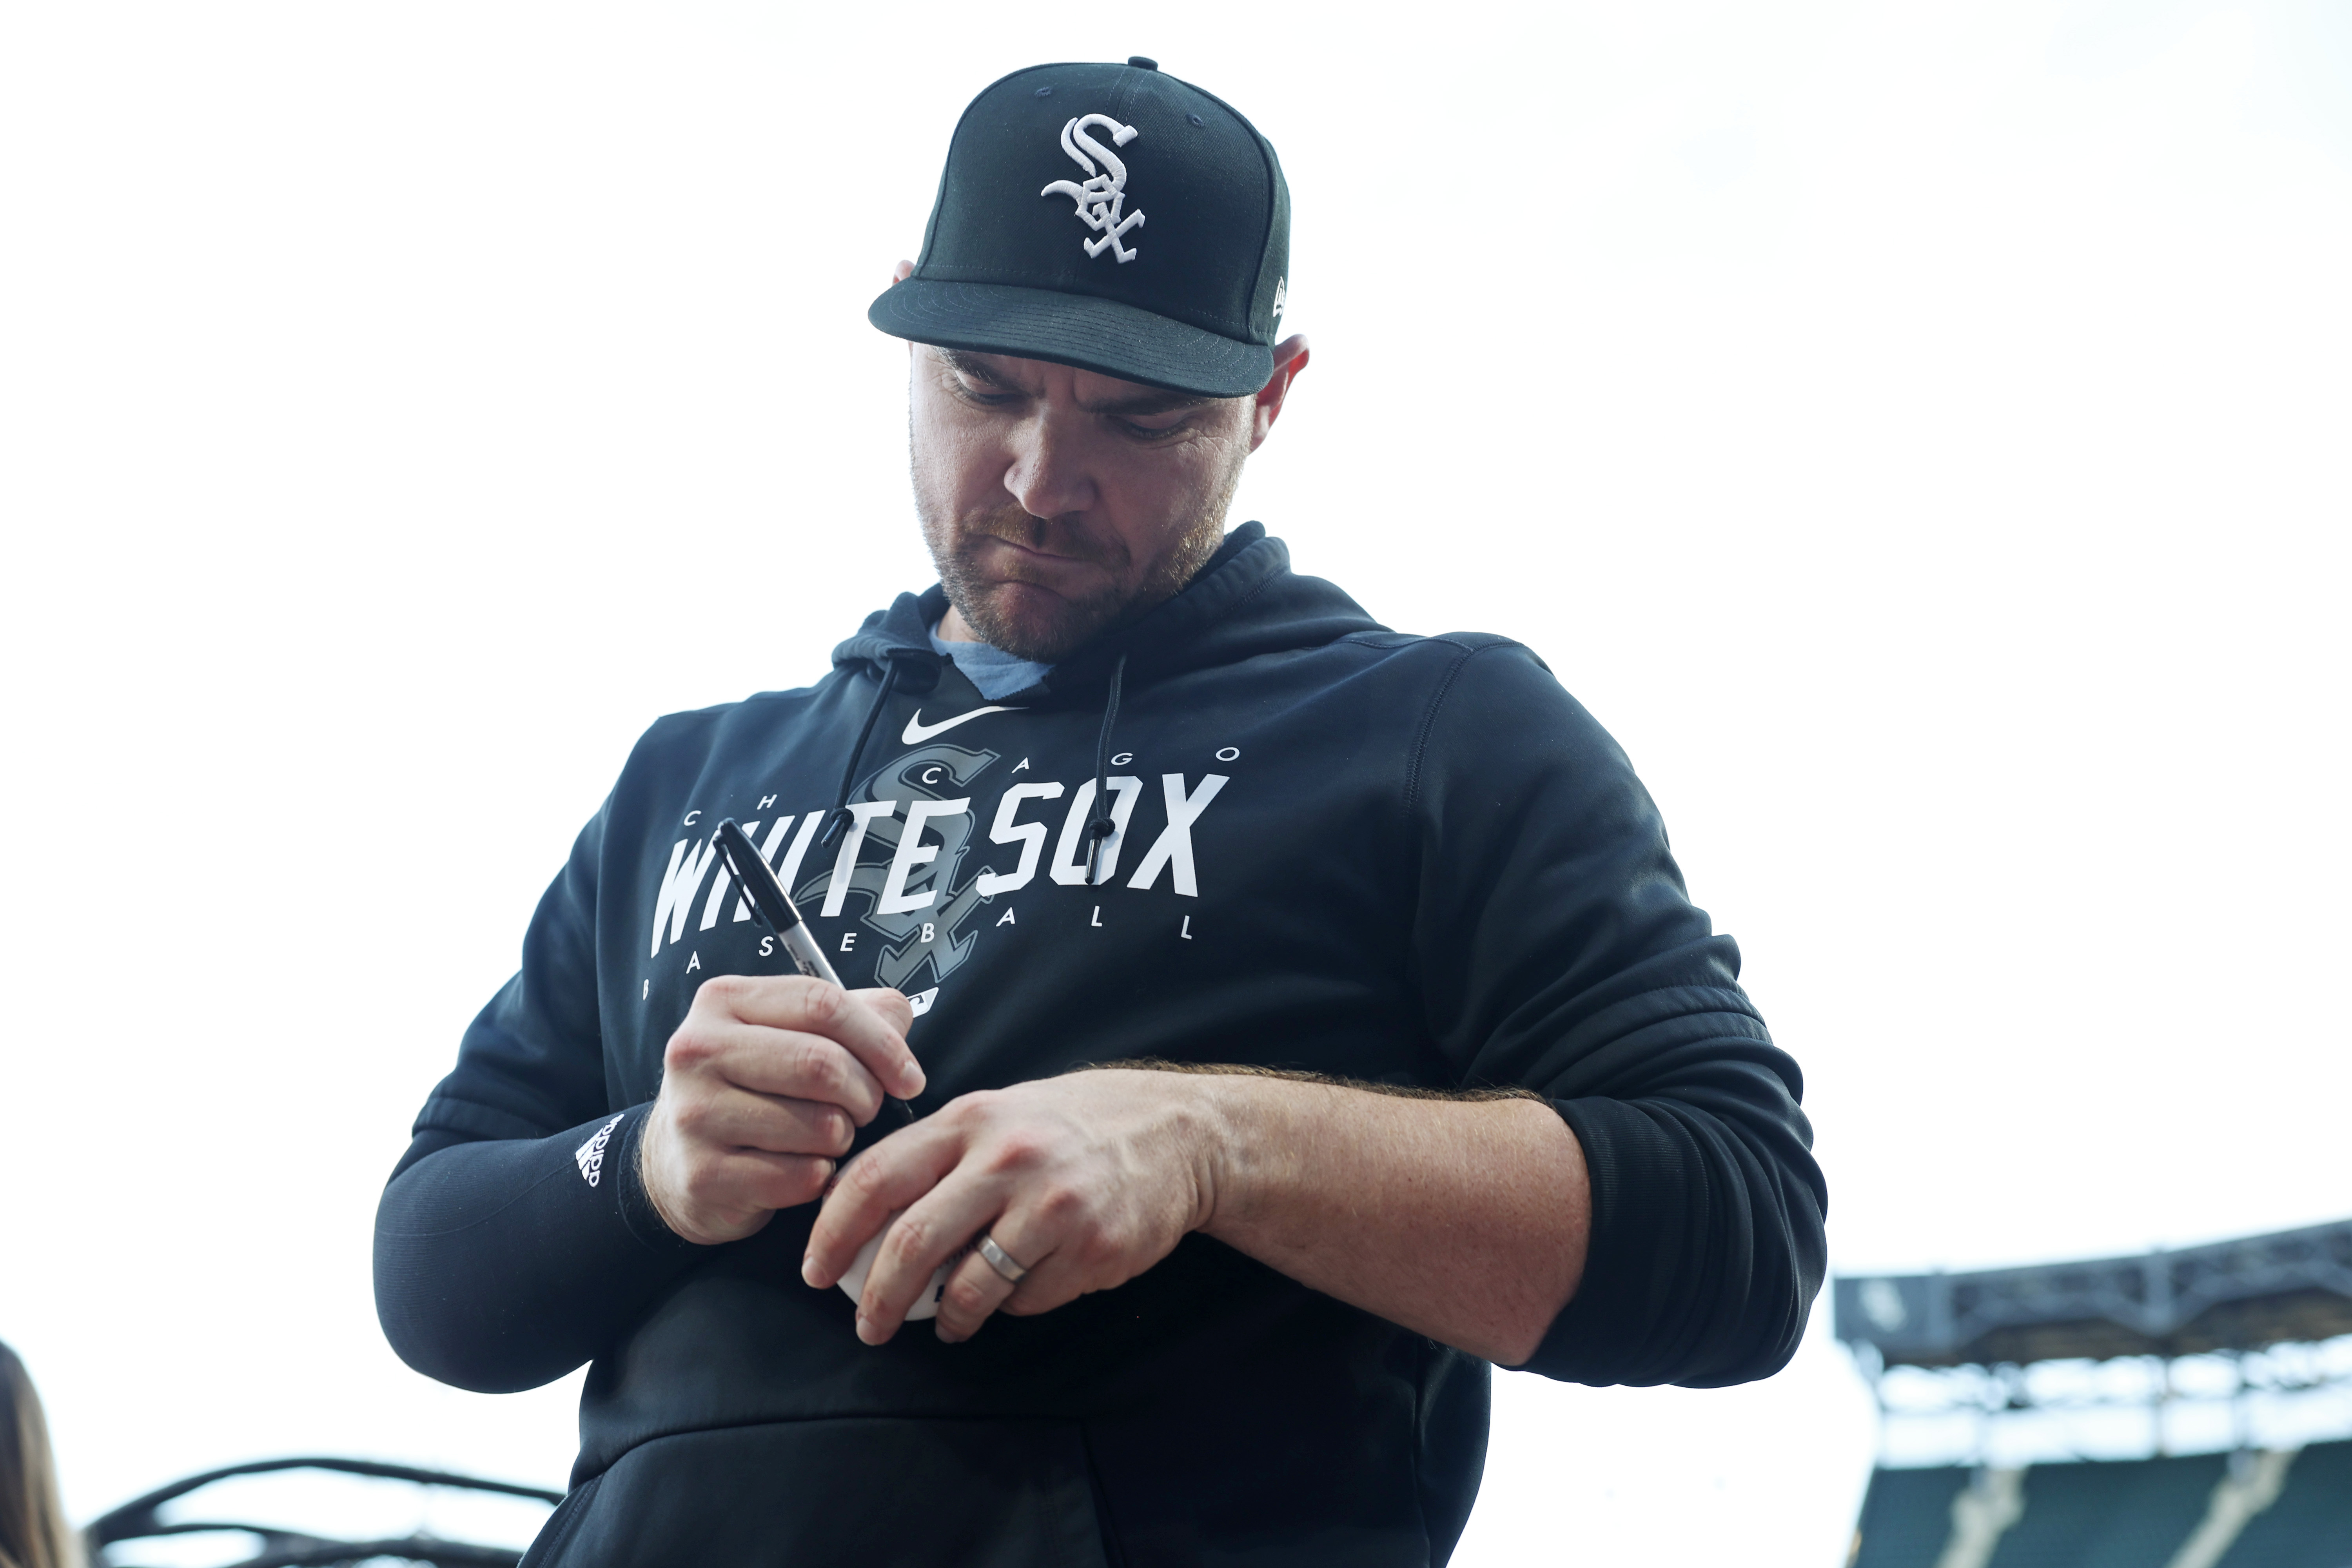 Chicago White Sox reliever Liam Hendriks eyes comeback after surgery